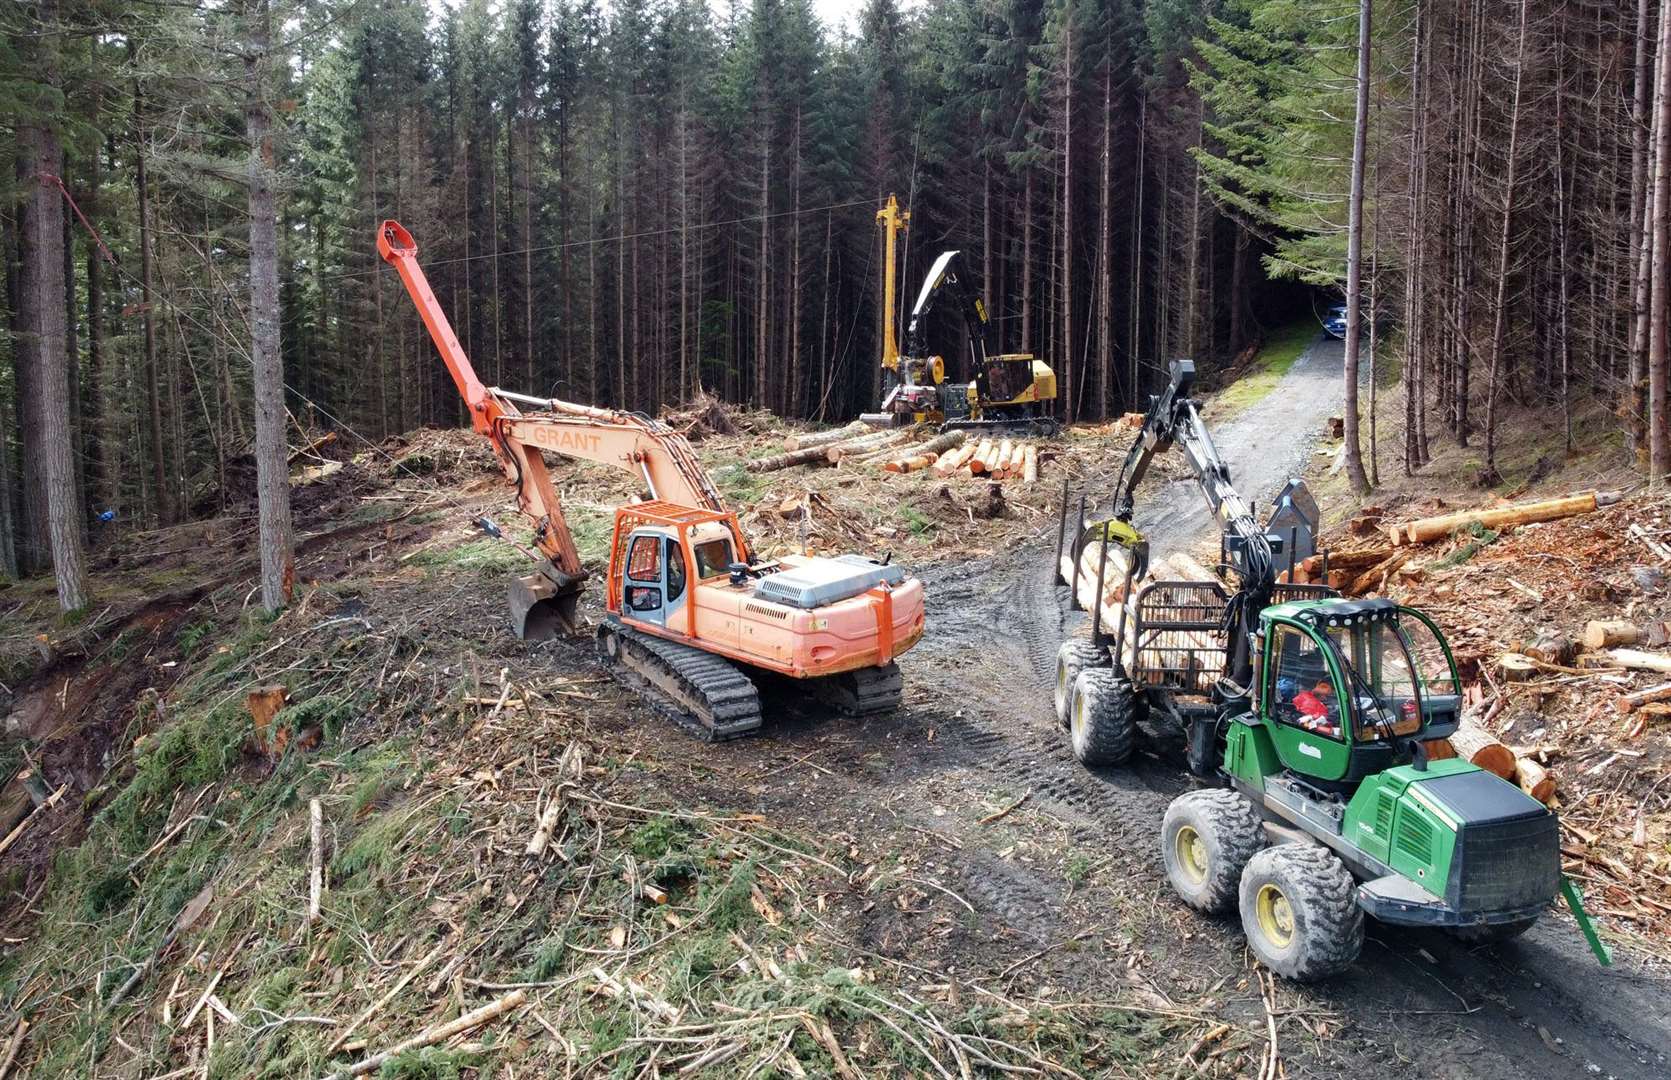 Felling work will force the closure of part of the Great Glen Way for several months.